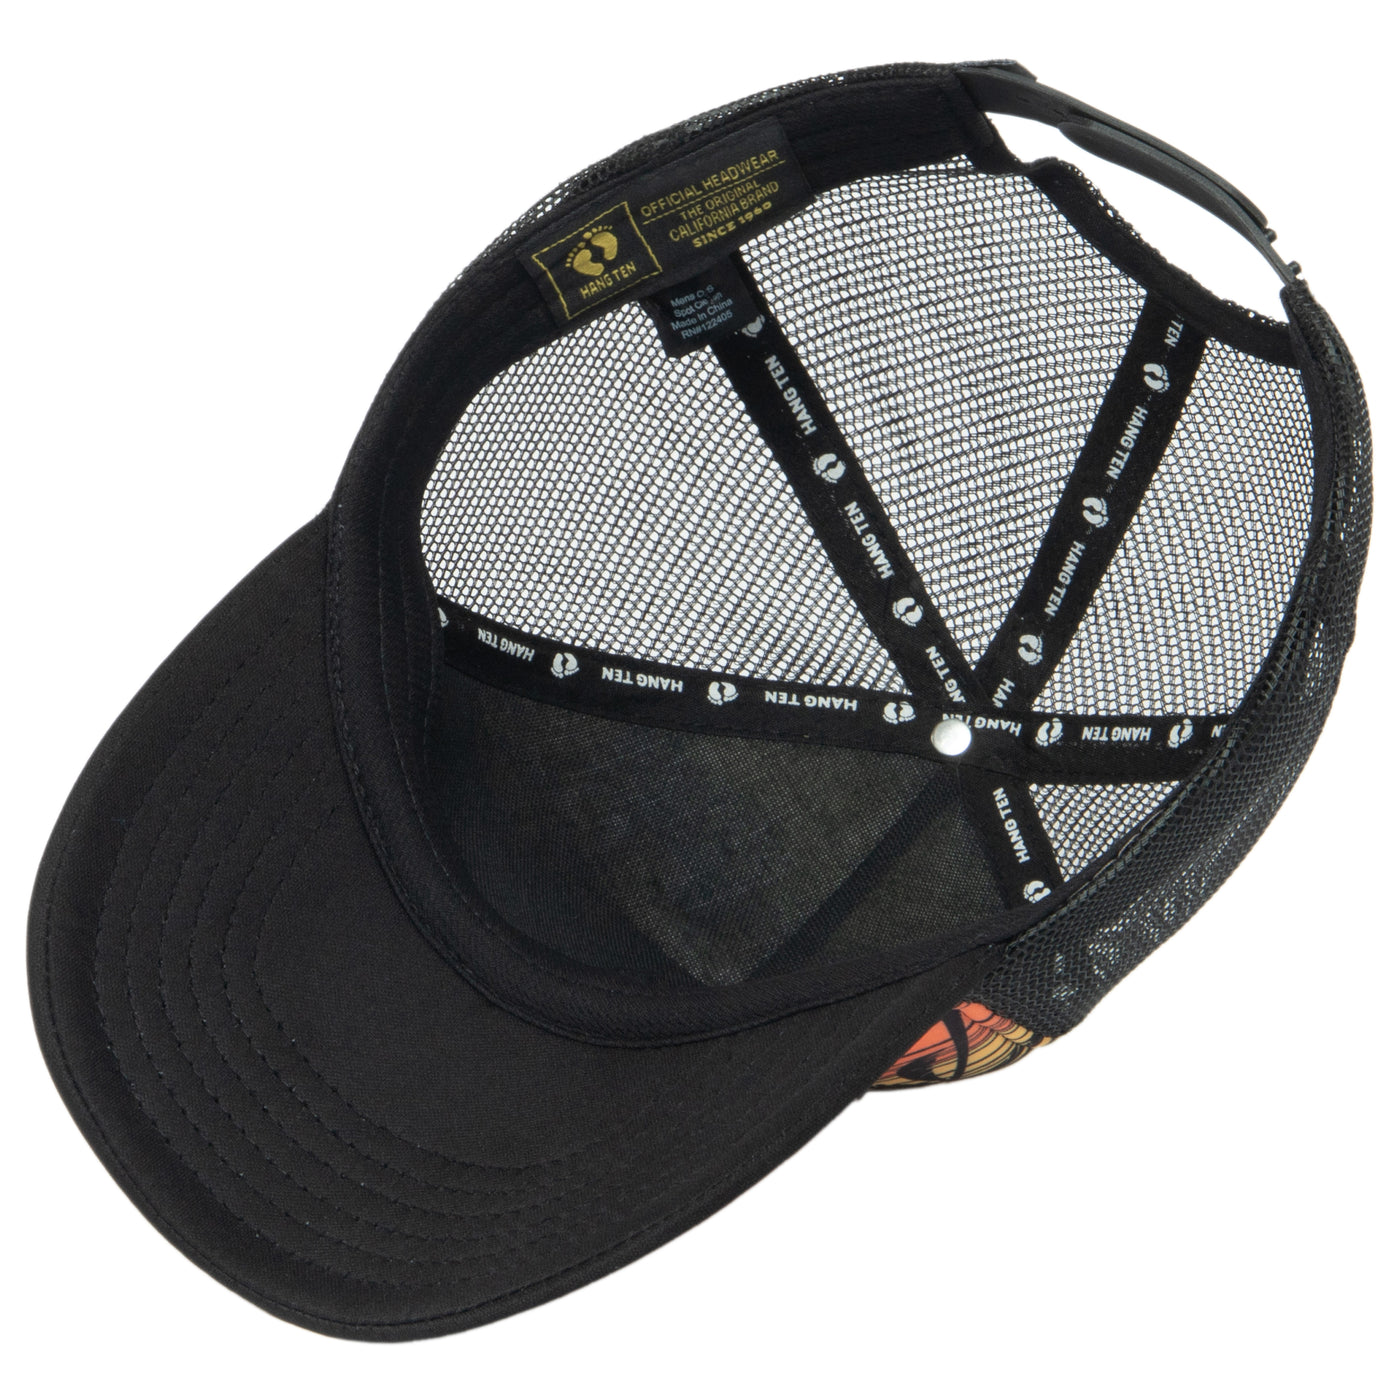 Hang Ten Sublimated Trucker Hat with Gel Print Logo and Mesh Back-Trucker-San Diego Hat Company